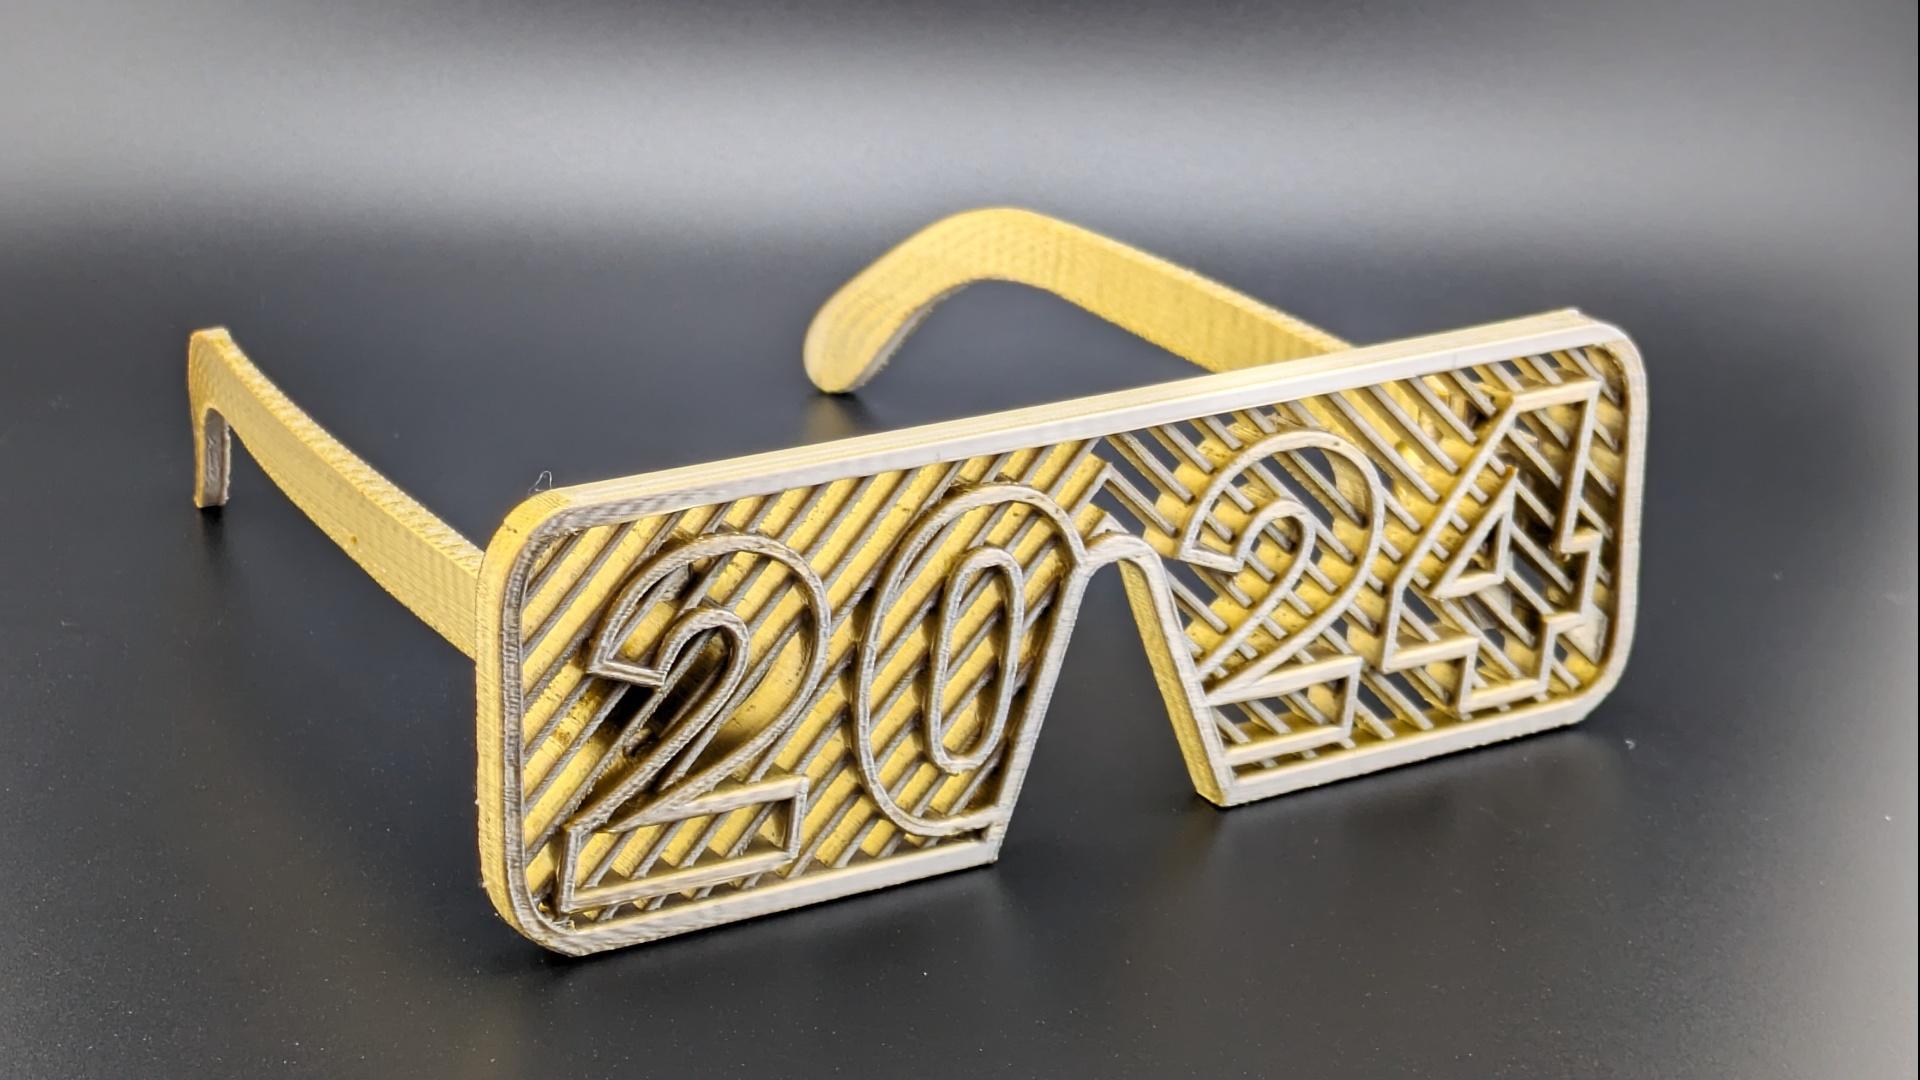 2024 Glasses - 2024 Glasses printed in Silver Gold MatterHackers Quantum PLA 

(Printed On Ankermake M5C at .16mm layerheight) - 3d model